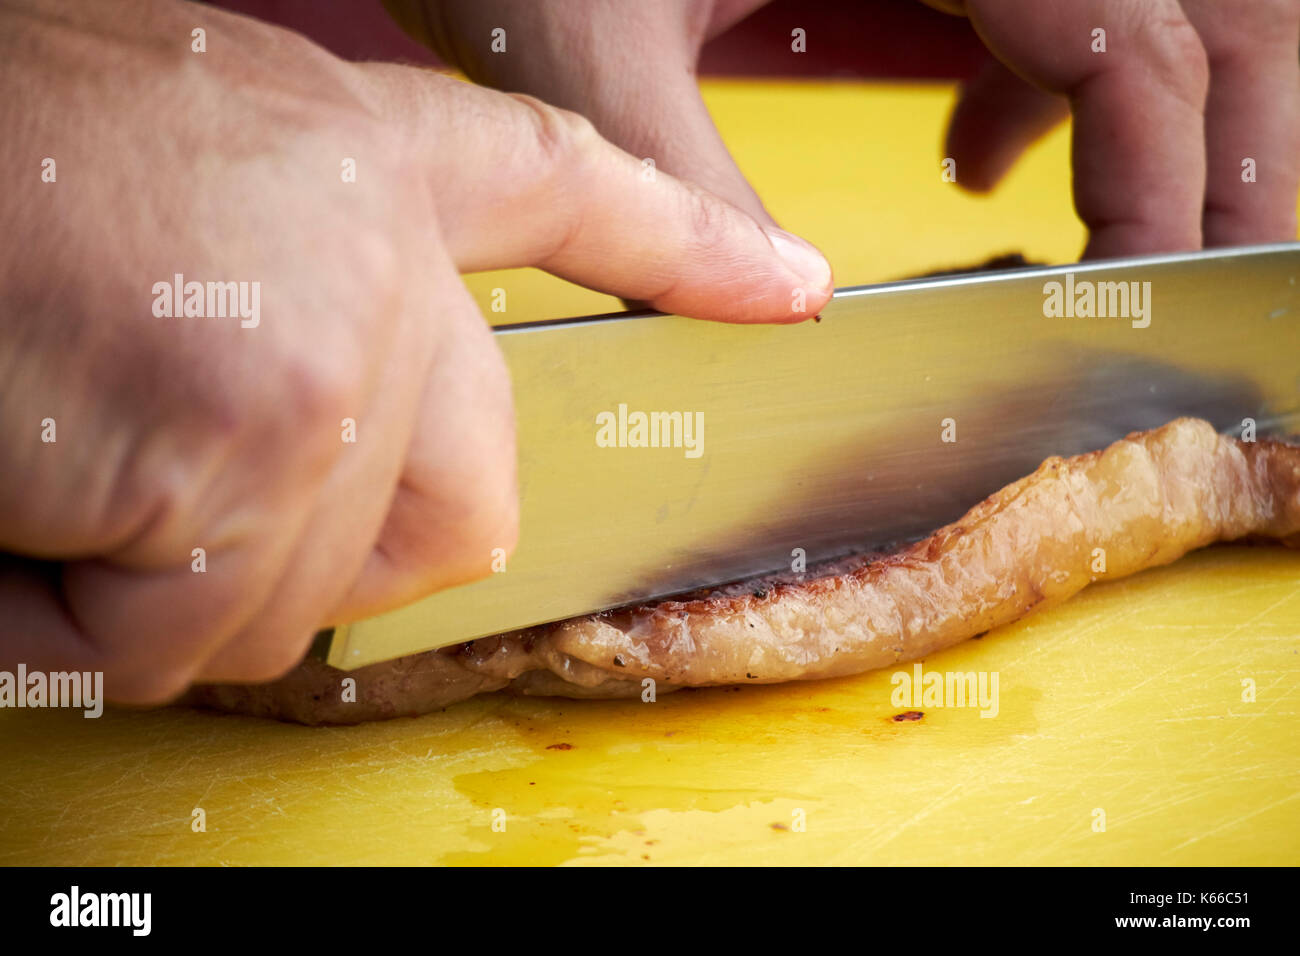 man cutting the fat off a piece of steak Stock Photo